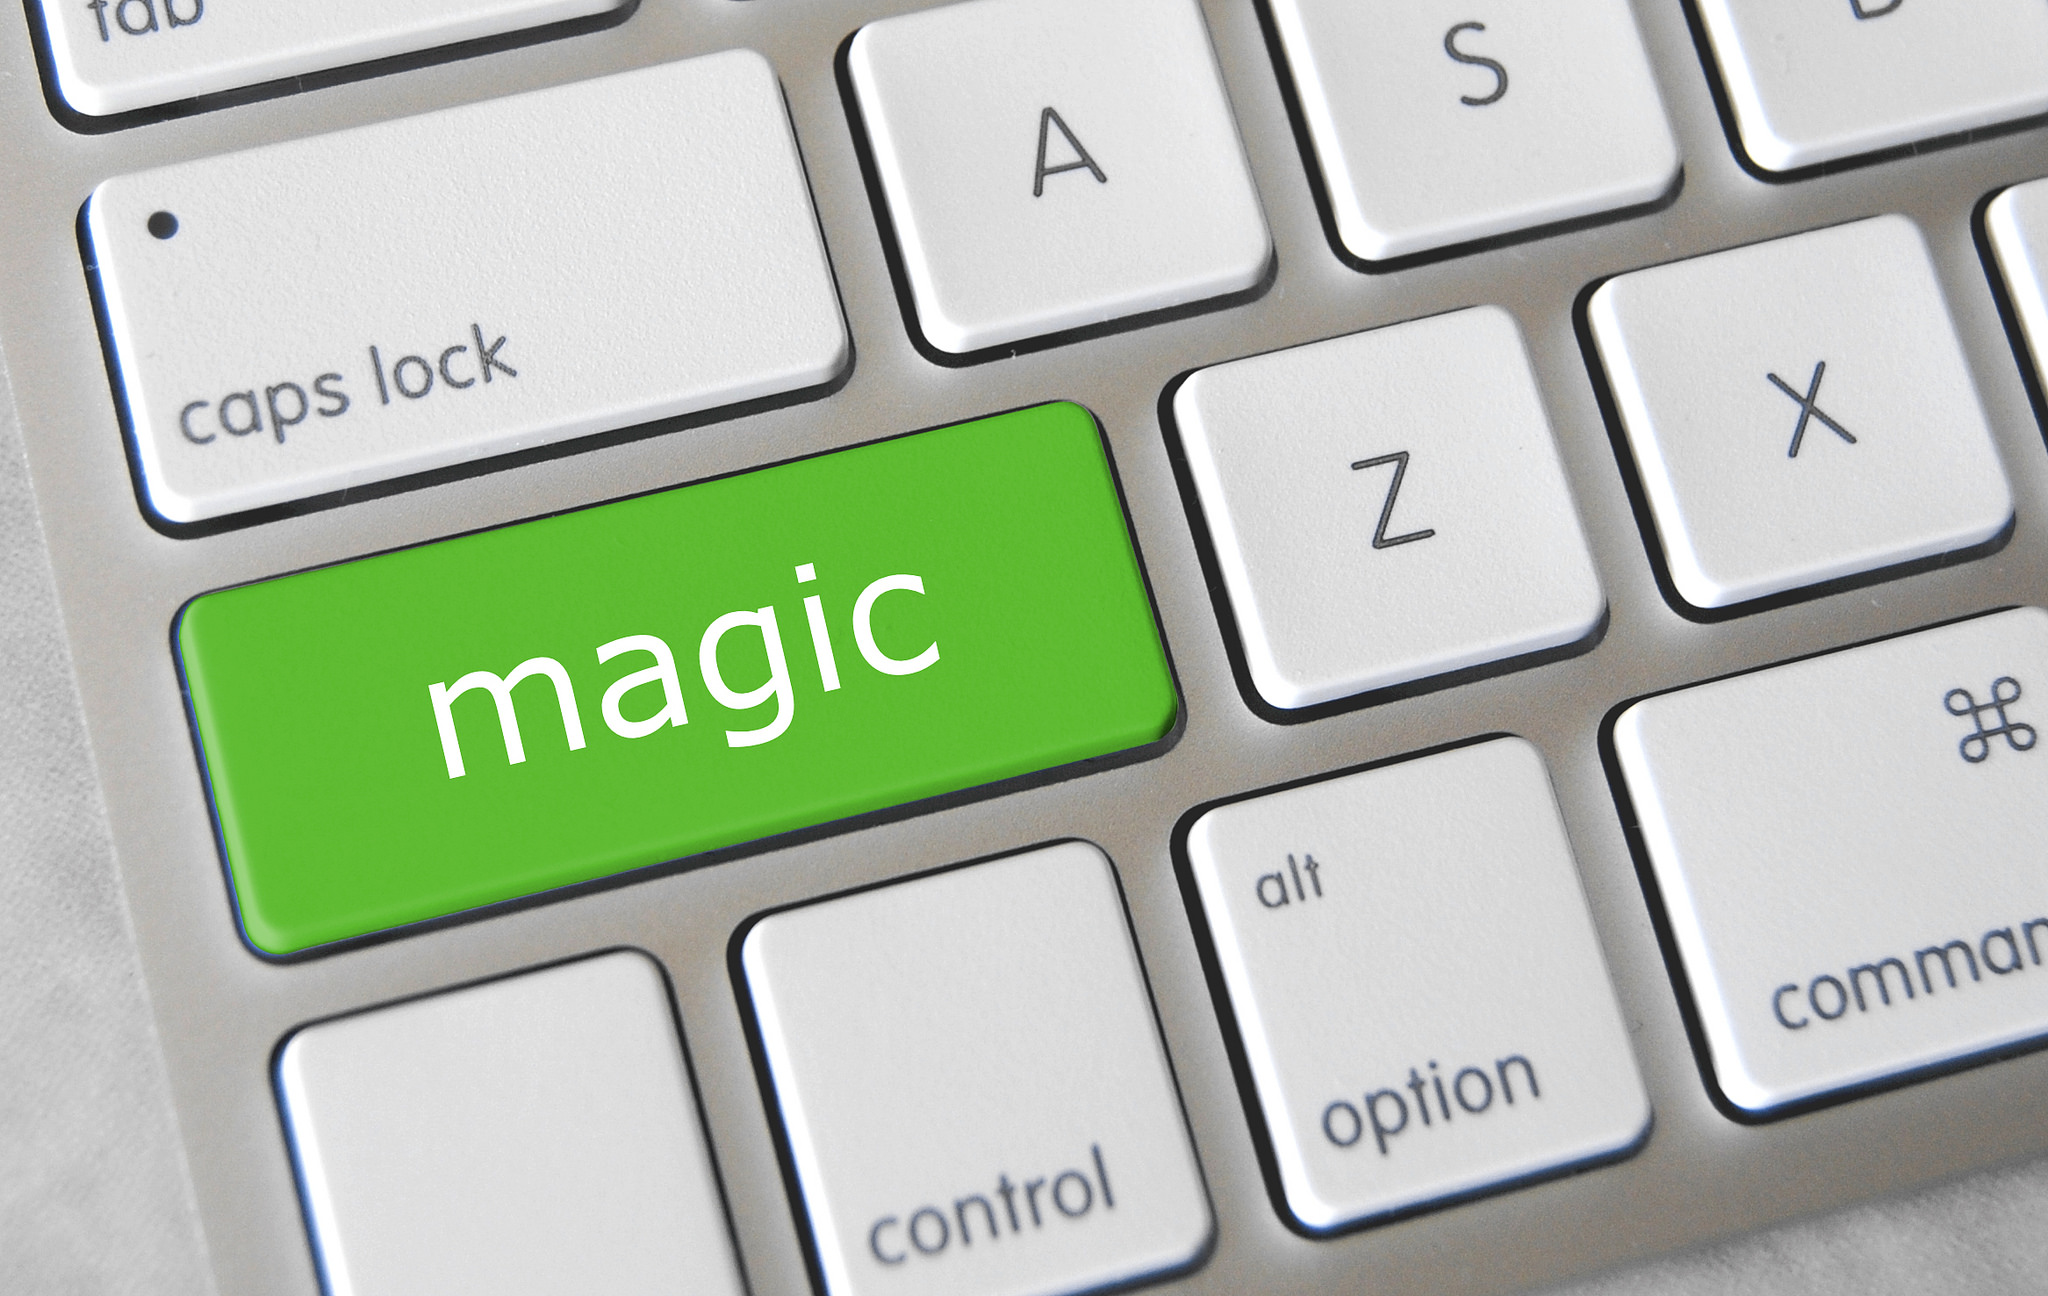 A magic button on a Mac keyboard Published as part of 